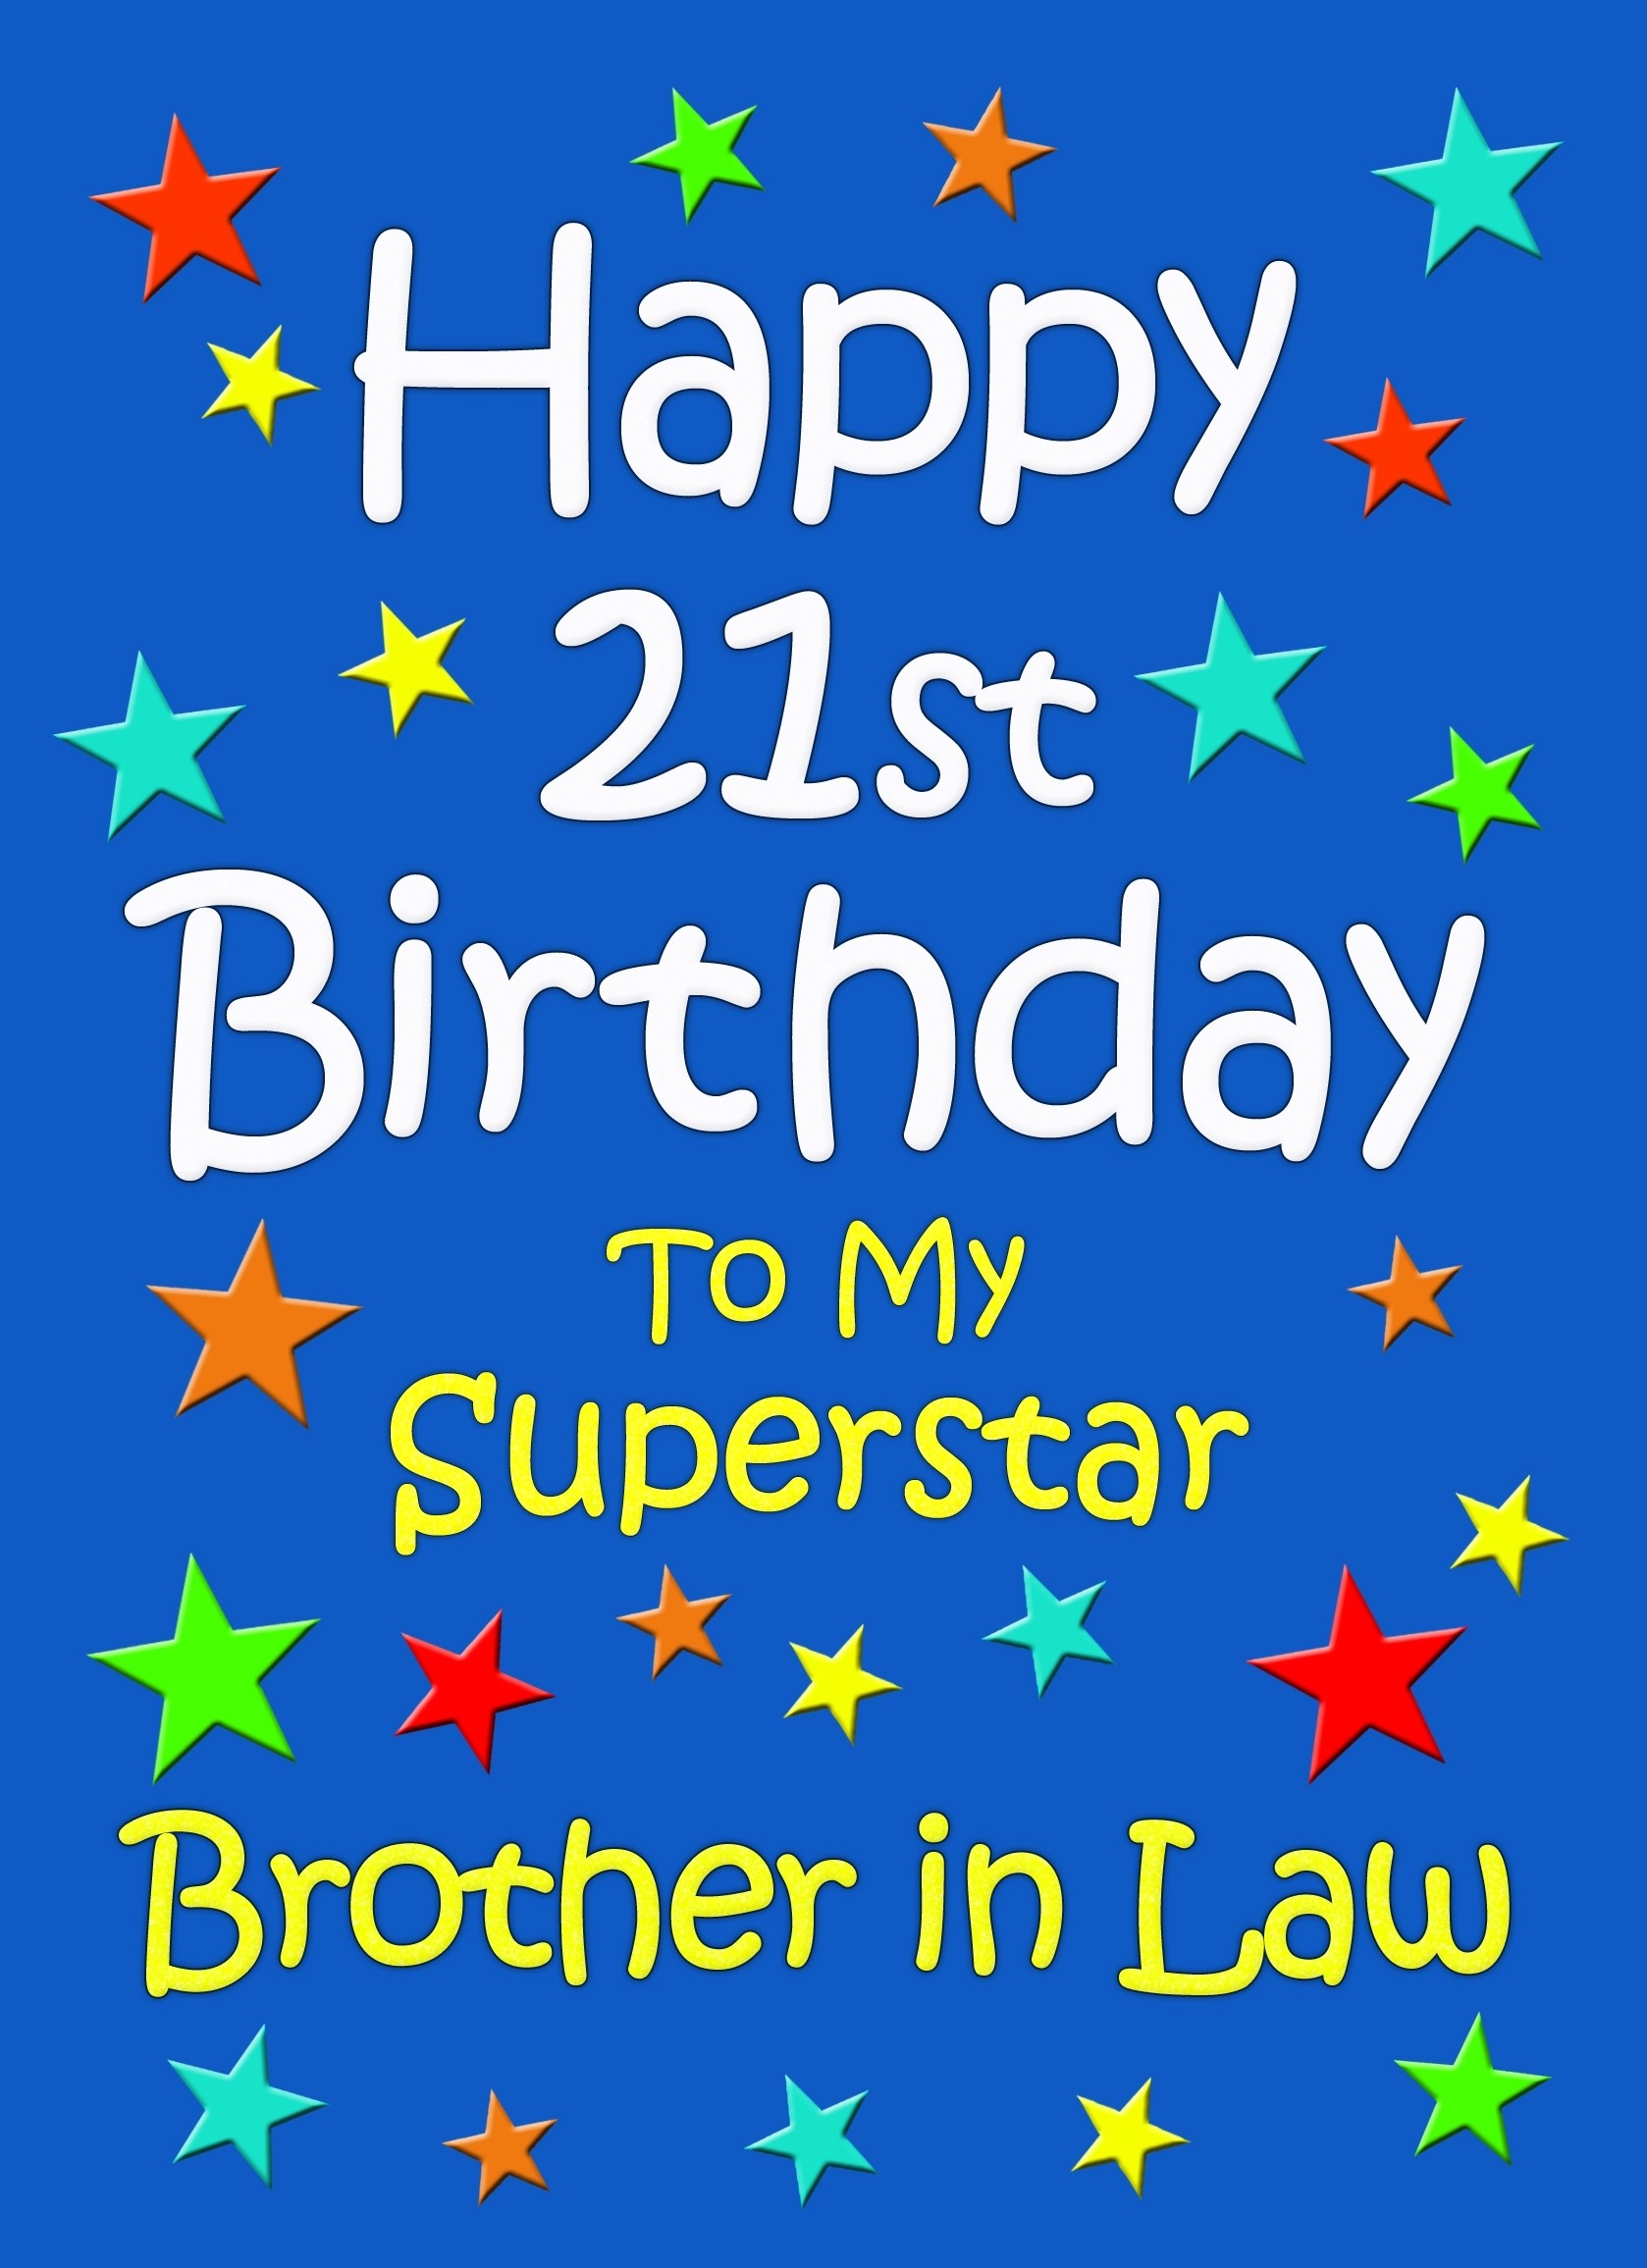 Brother in Law 21st Birthday Card (Blue)